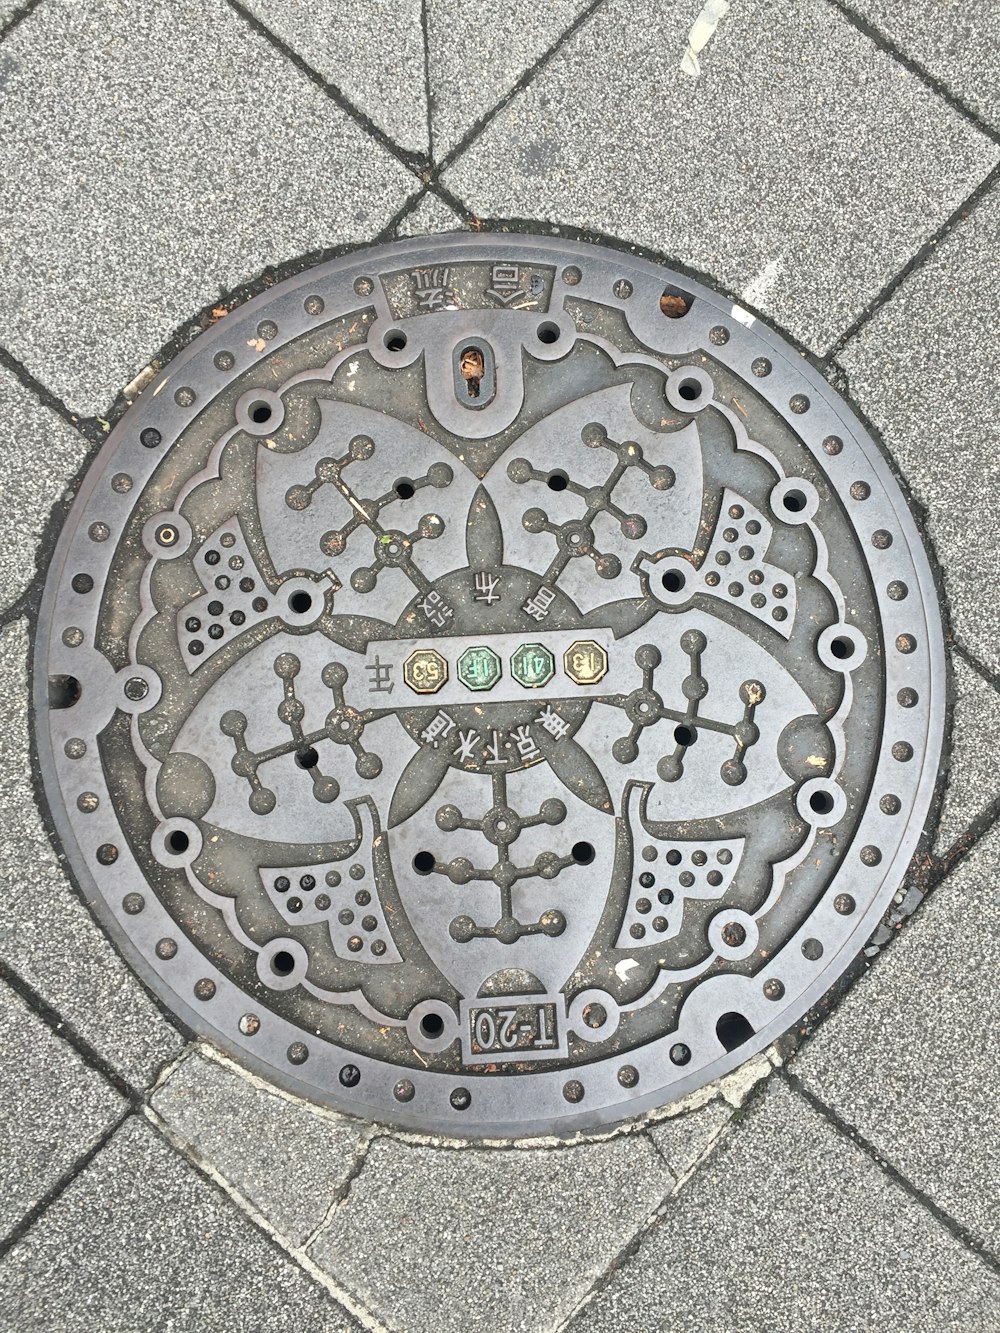 a manhole cover on the ground with a design on it